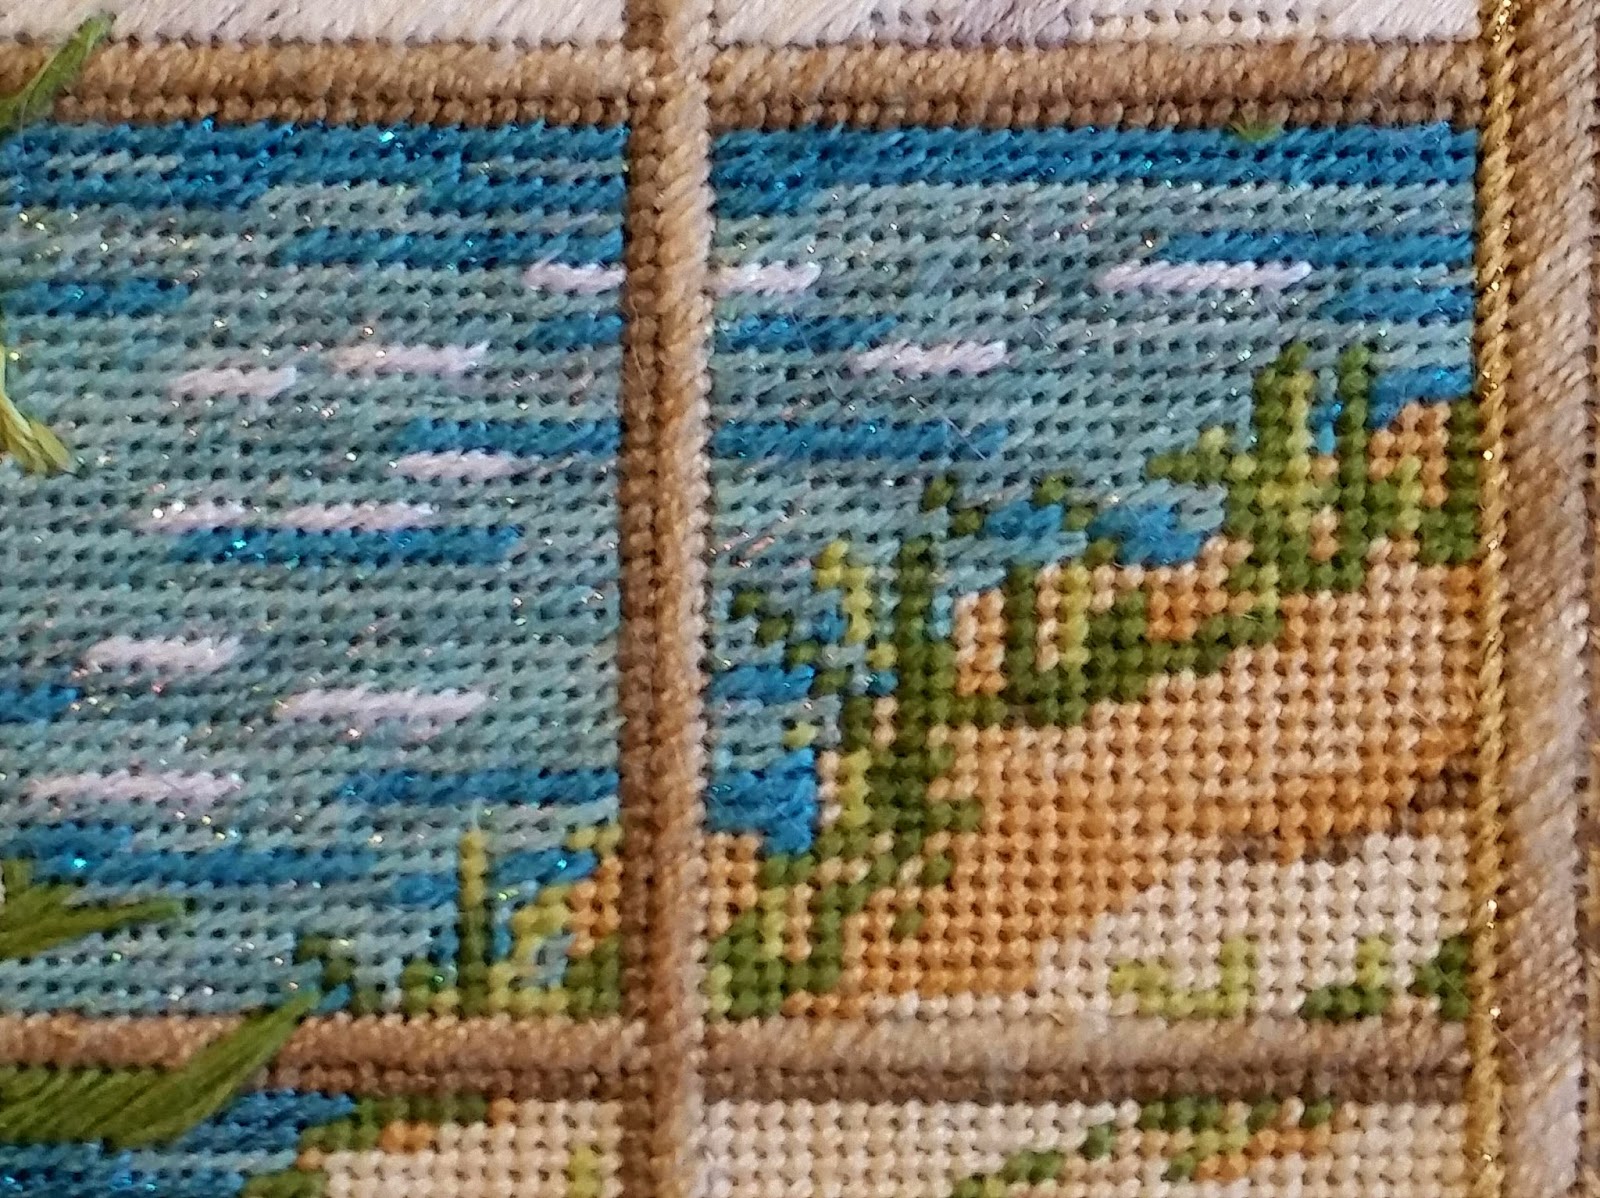 The beach/dune area is done in plain old tent/basketweave stitch, again usi...